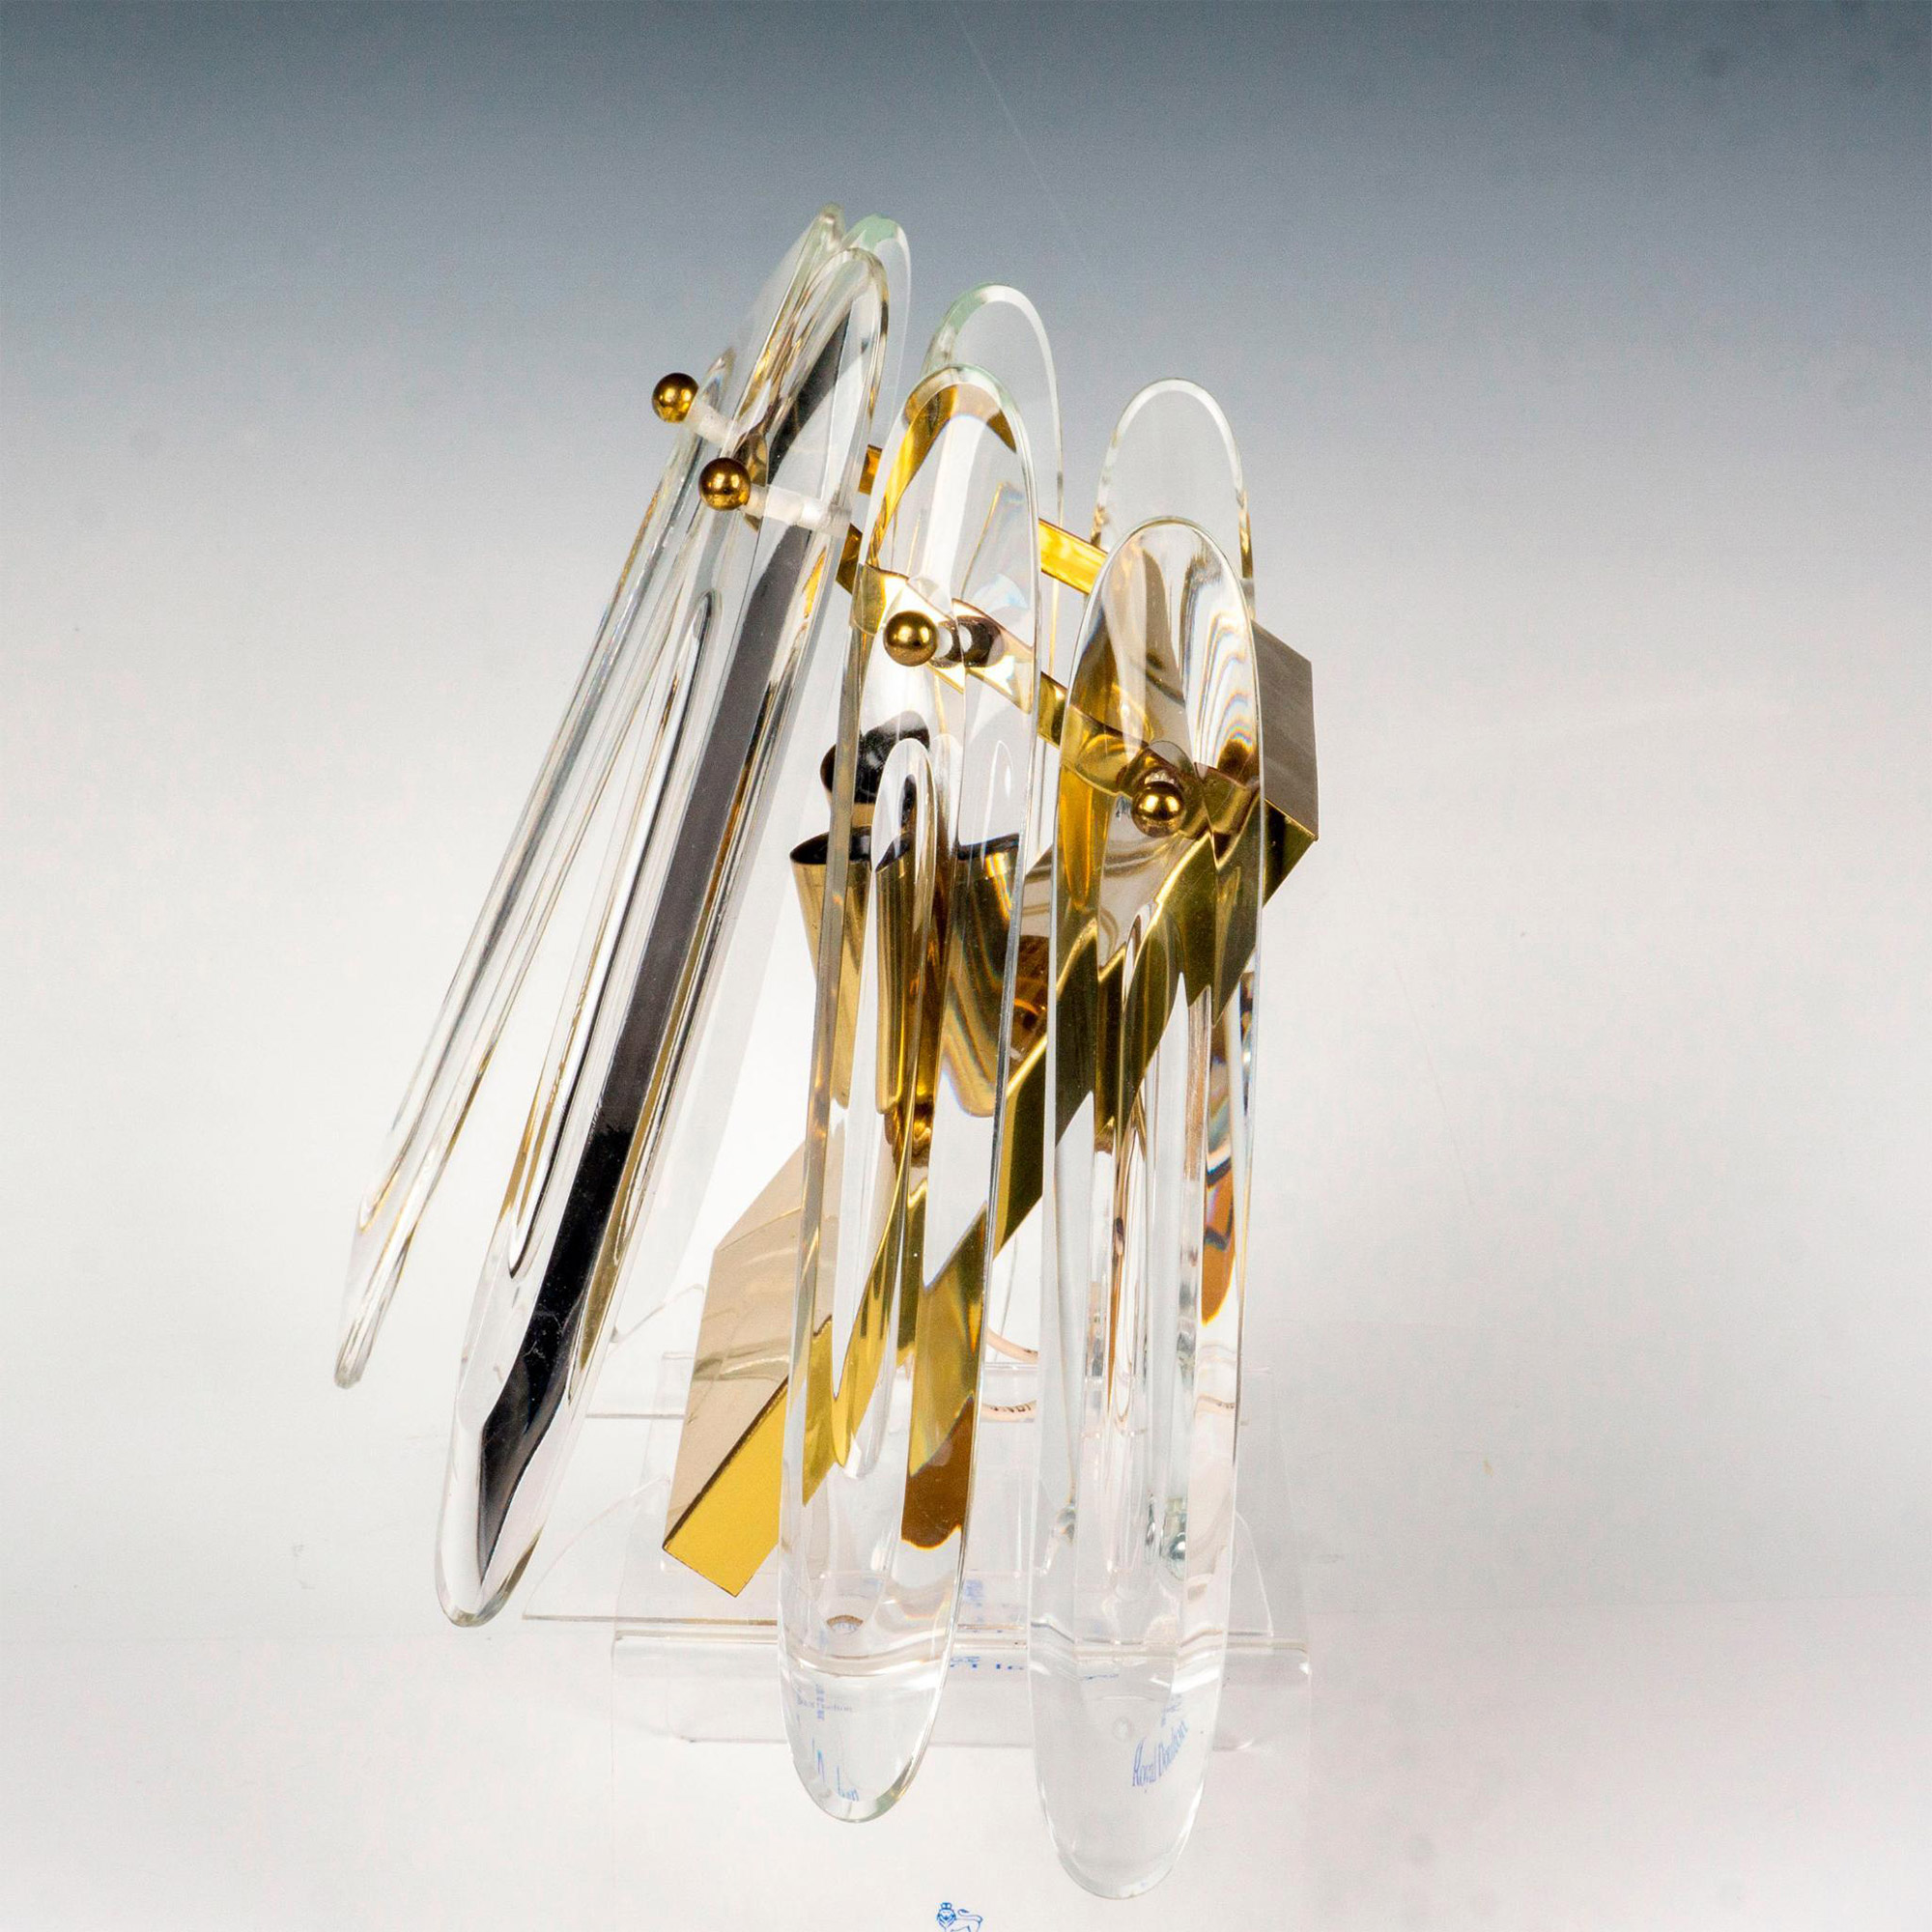 Beautiful Dangling Crystal Prism Electric Sconce Light - Image 2 of 4